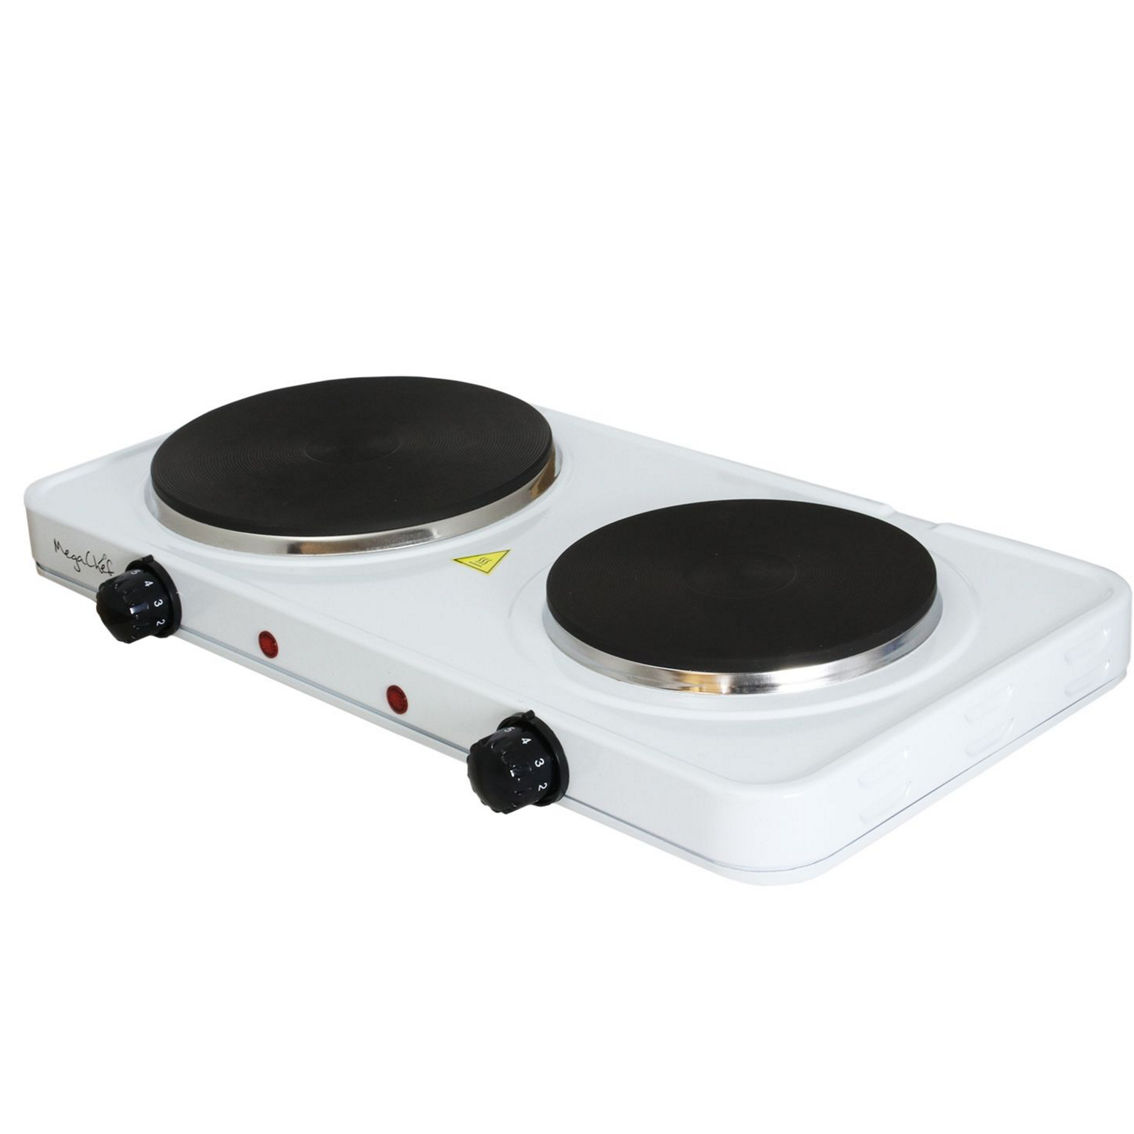 MegaChef Electric Easily Portable Ultra Lightweight Dual Burner Cooktop Buffet R - Image 4 of 5